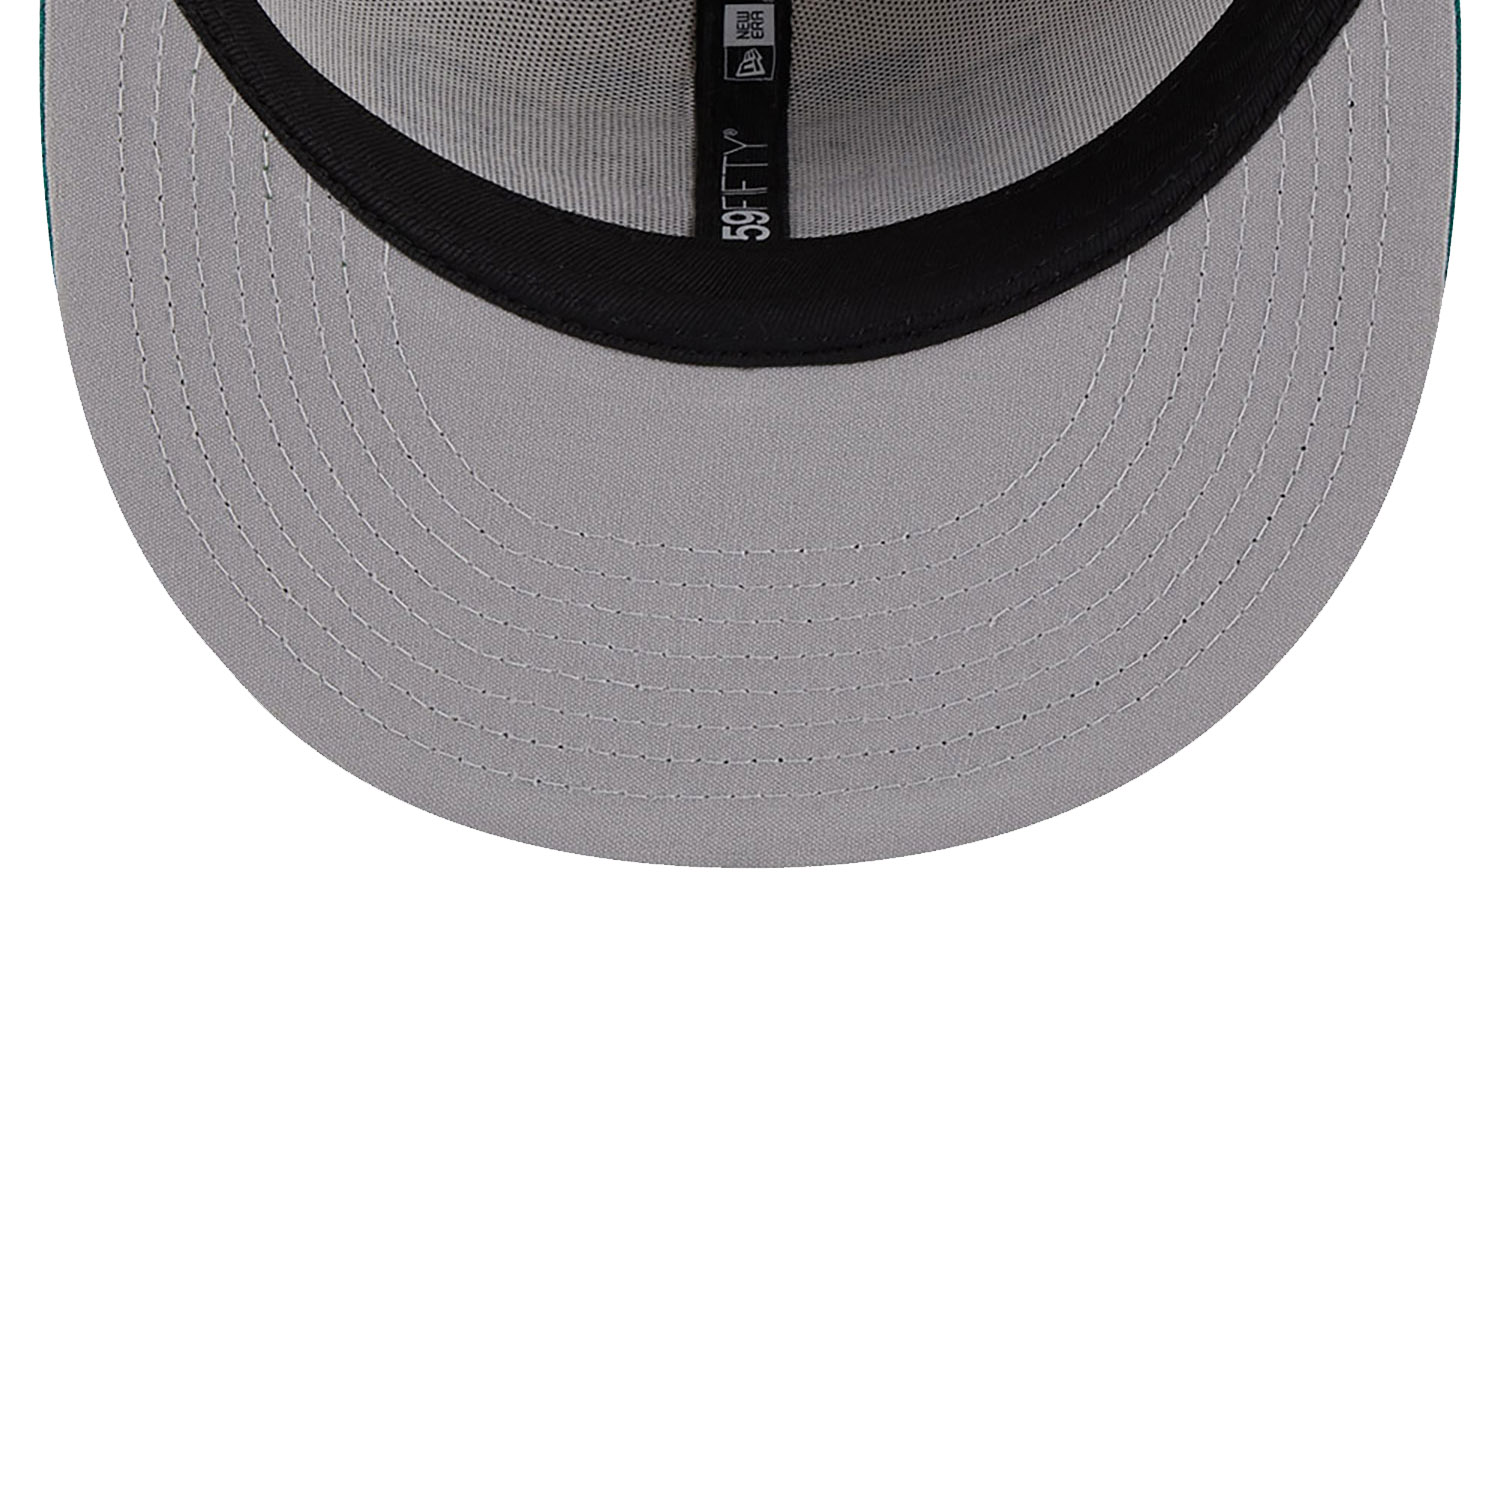 New York Jets NFL 2023 Draft White 59FIFTY Fitted Cap